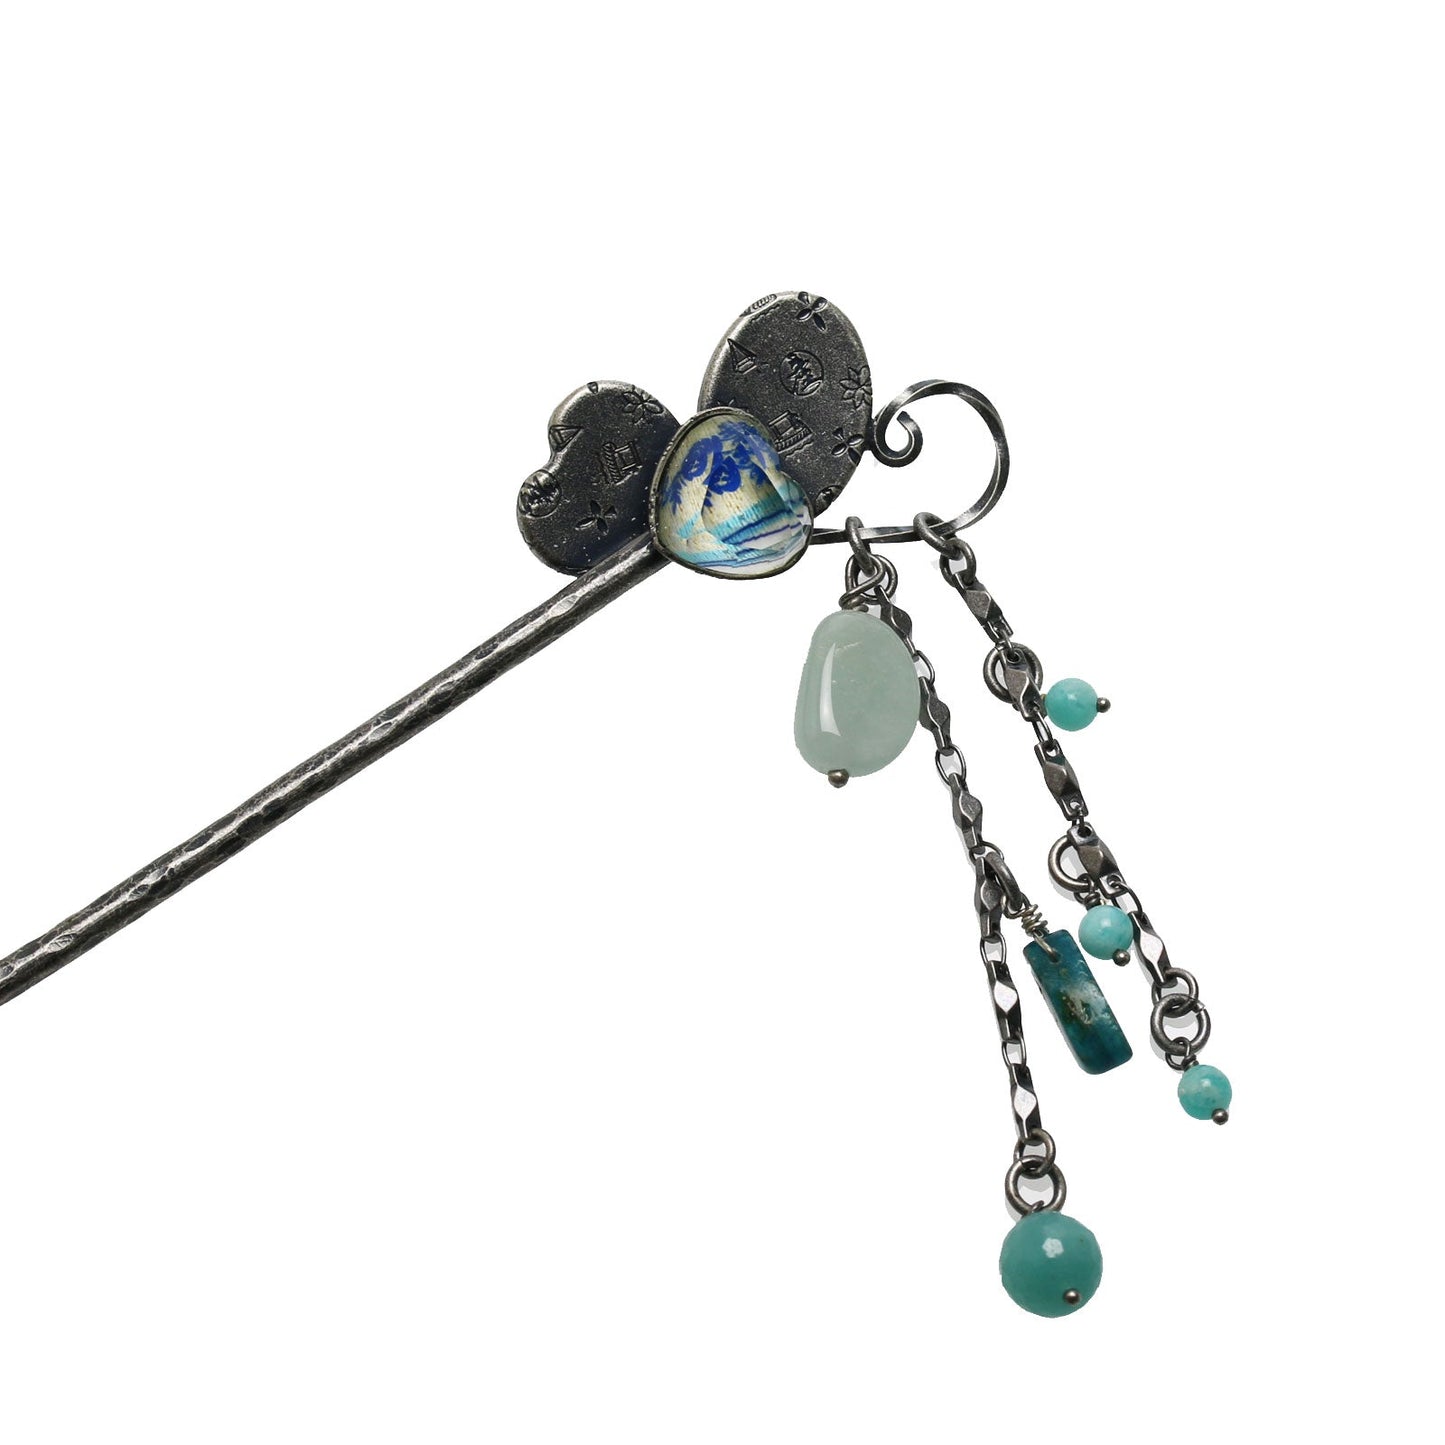 One Stick Hairpin Butterfly Blue Rose TAMARUSAN